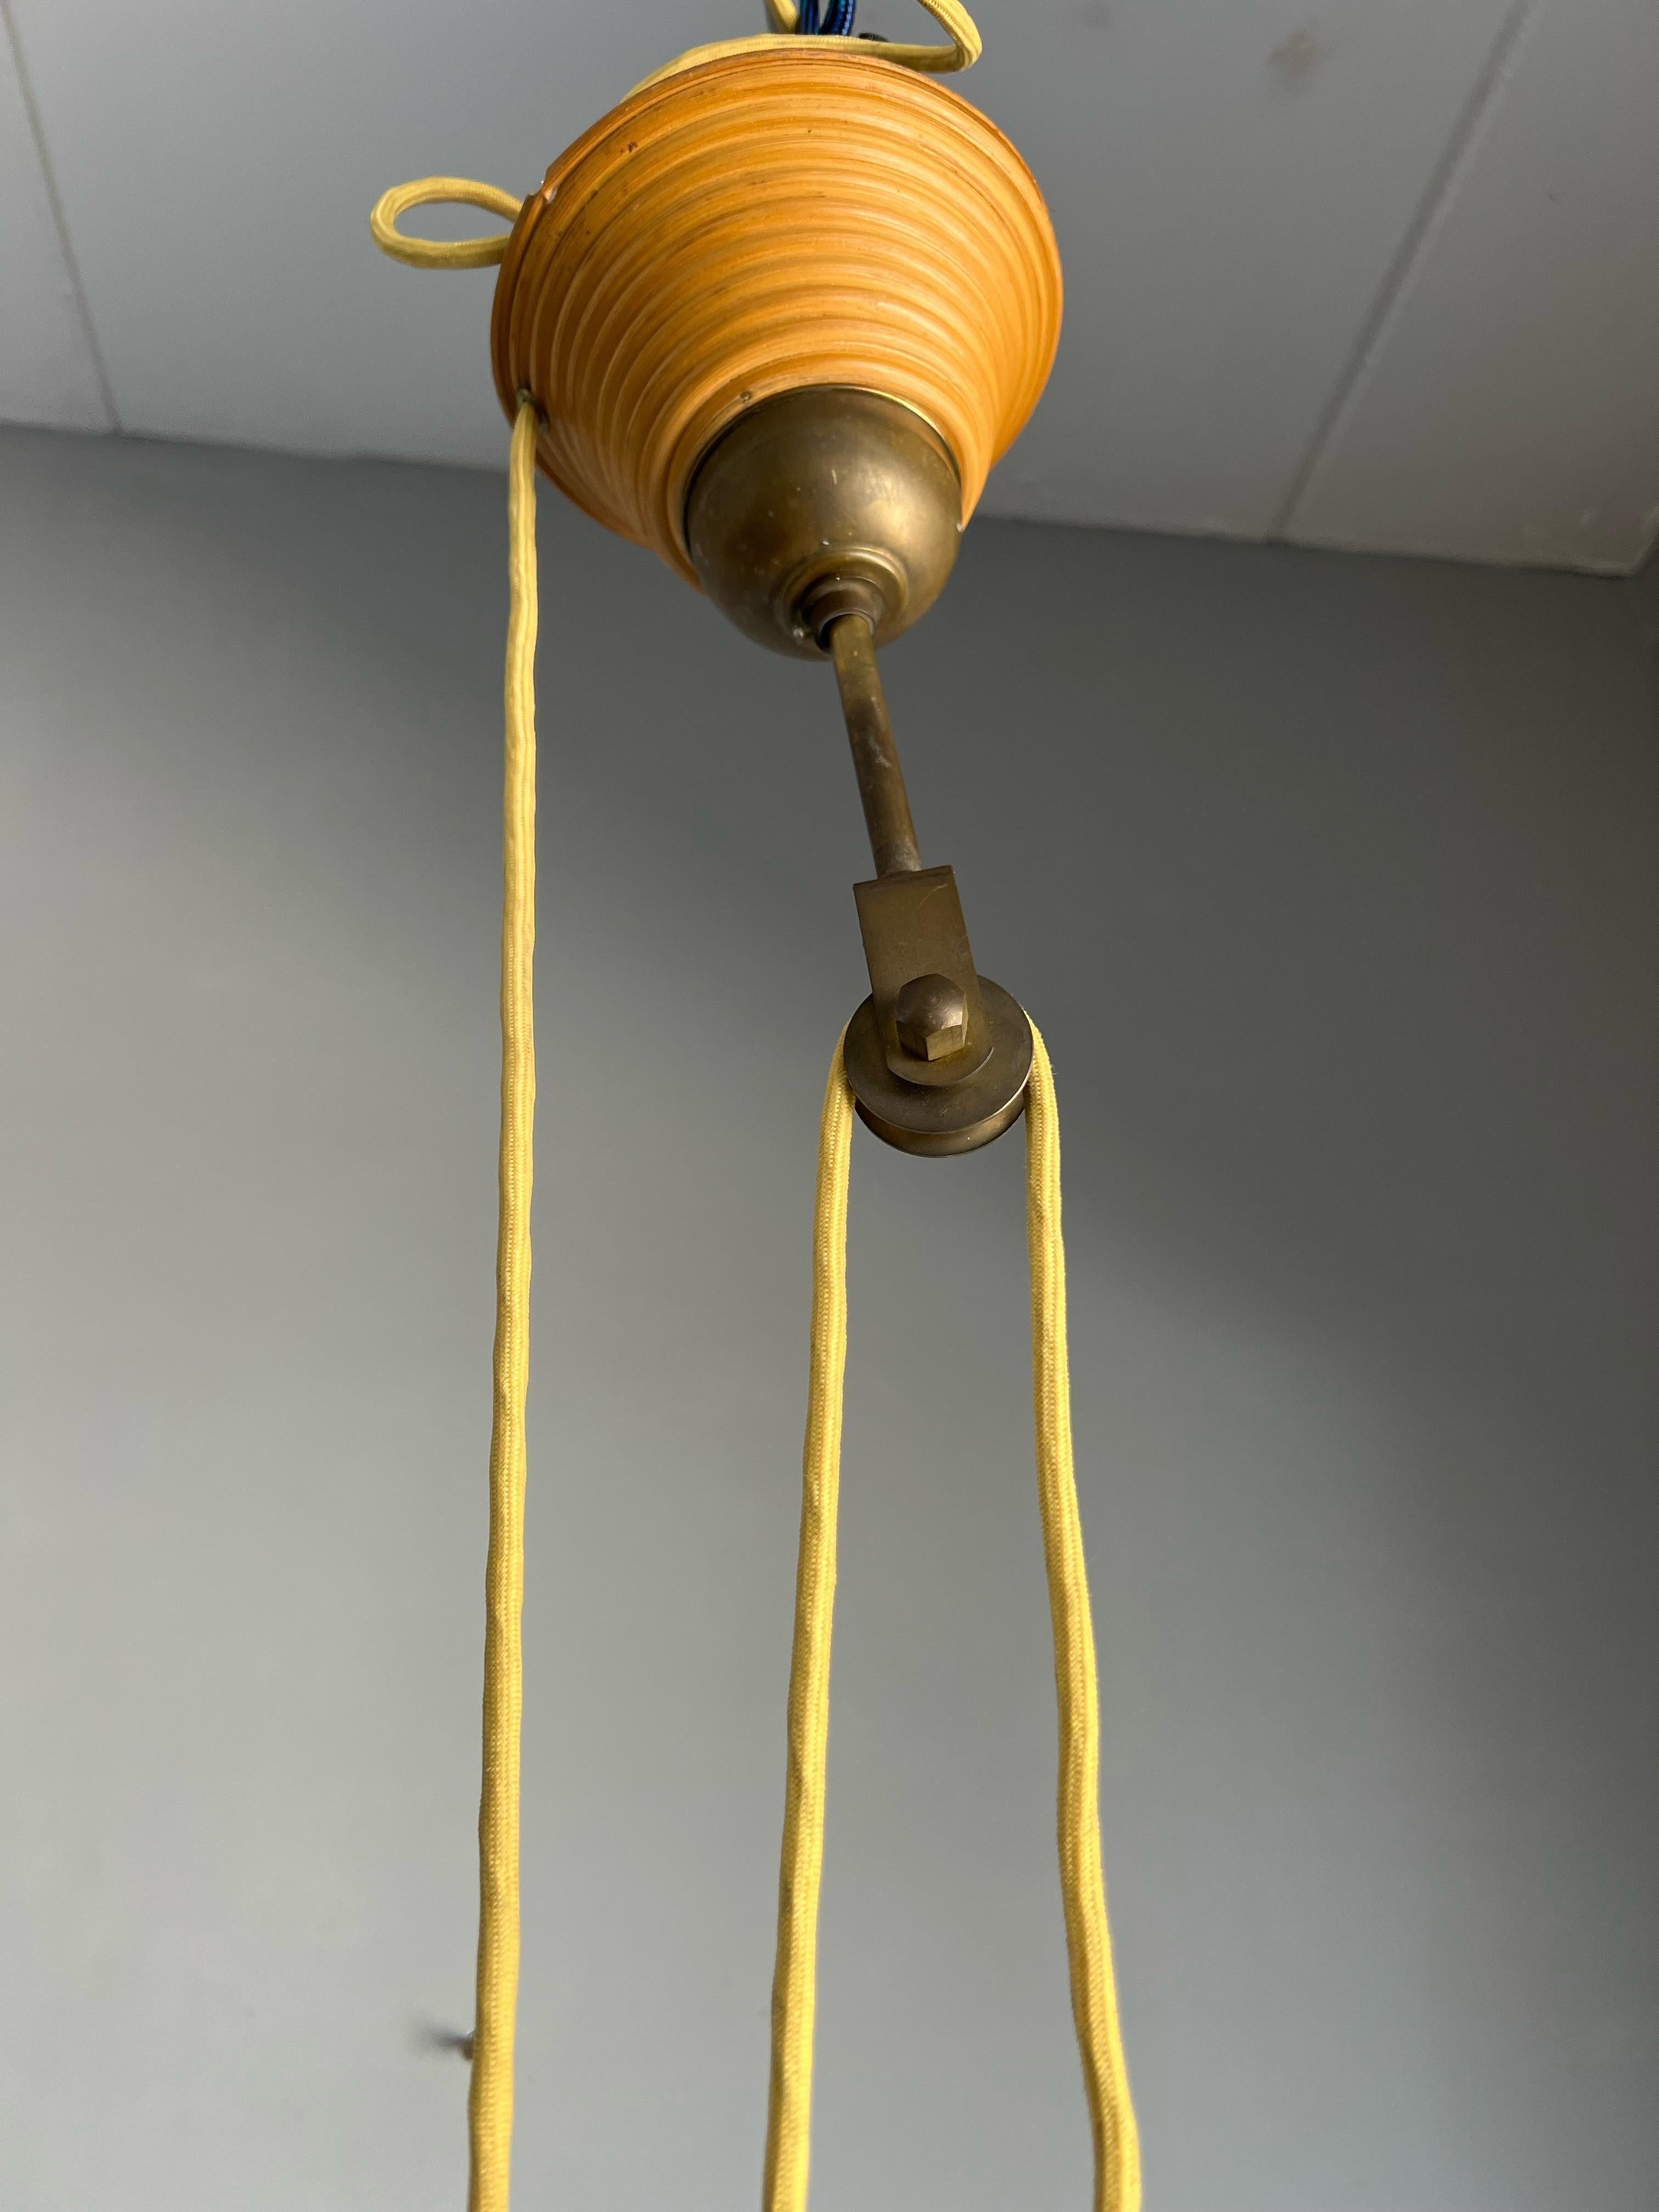 Rare Handcrafted Mid-Century Modern Rattan & Brass Pendant Light / Ceiling Lamp For Sale 6